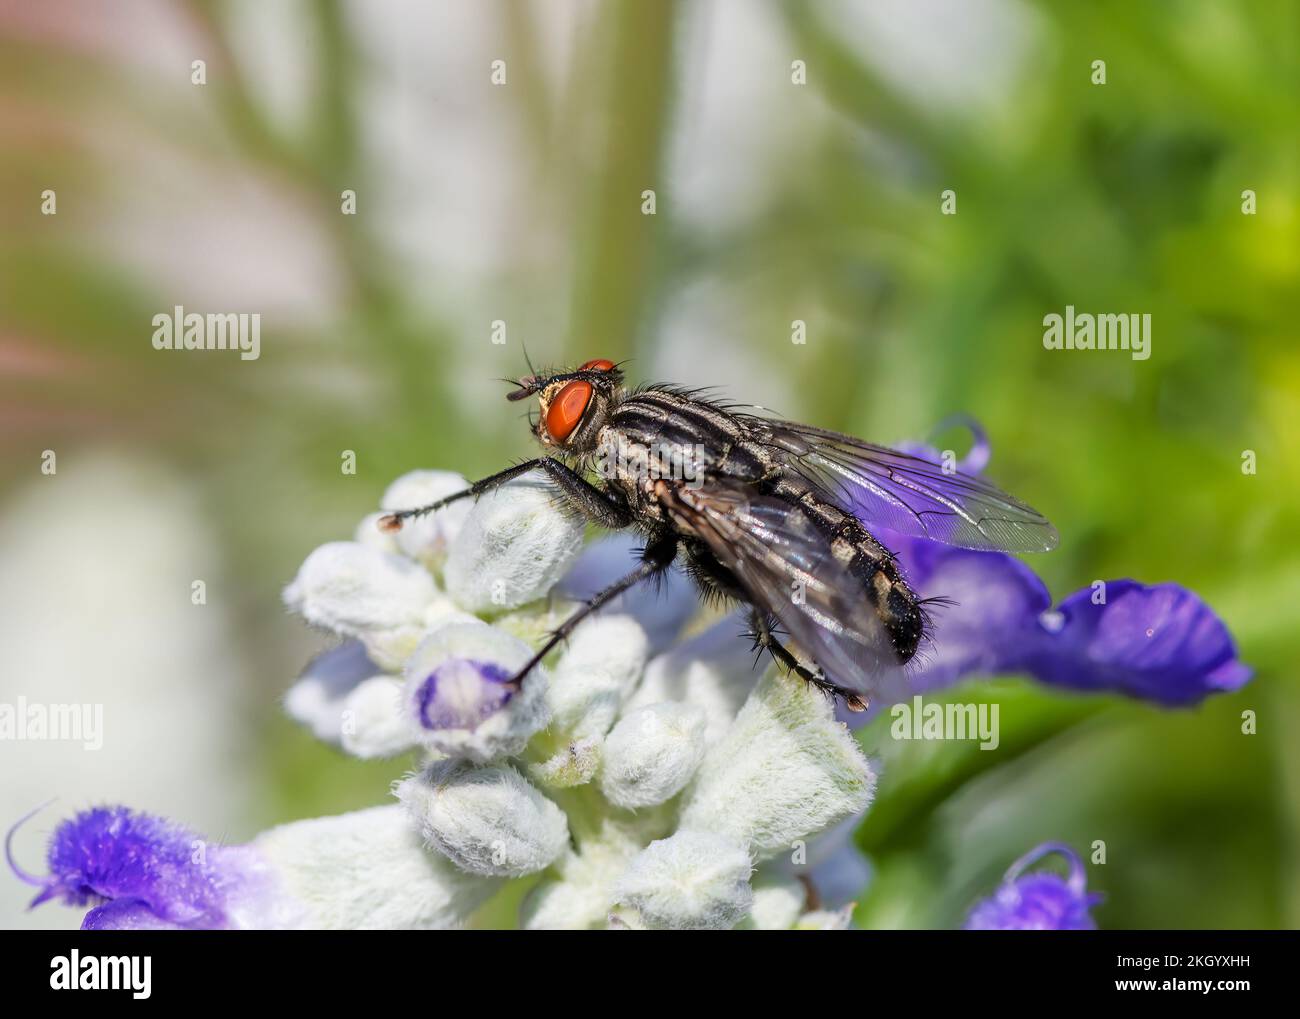 Macro of a fly sitting on a blossom Stock Photo